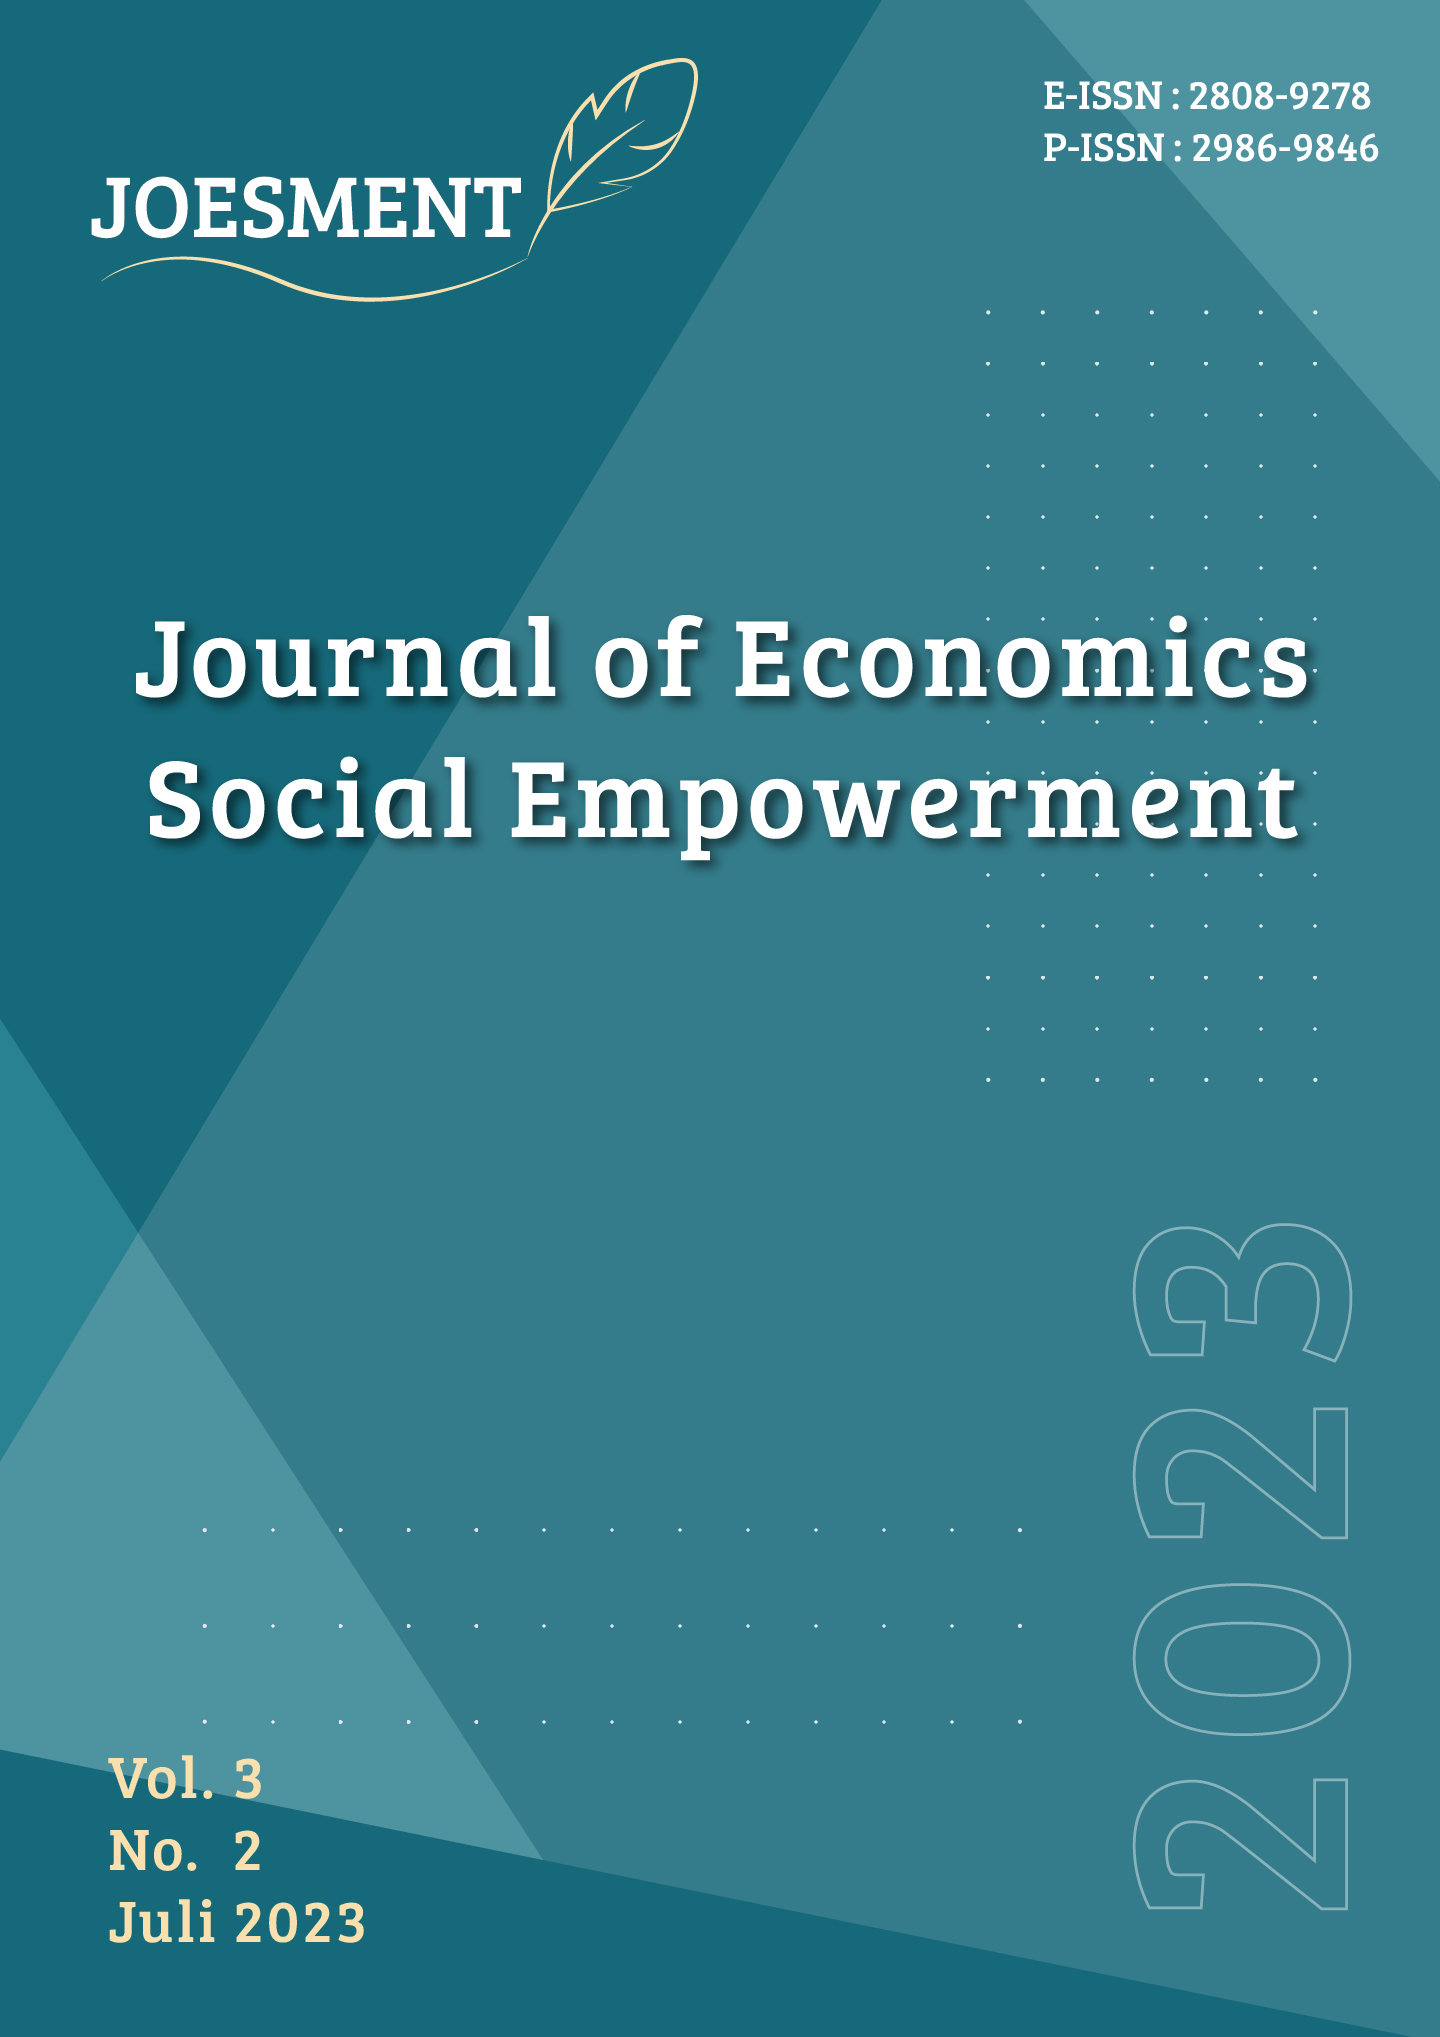 					View Vol. 3 No. 2 (2023): JOURNAL OF ECONOMIC AND SOCIAL EMPOWERMENT
				